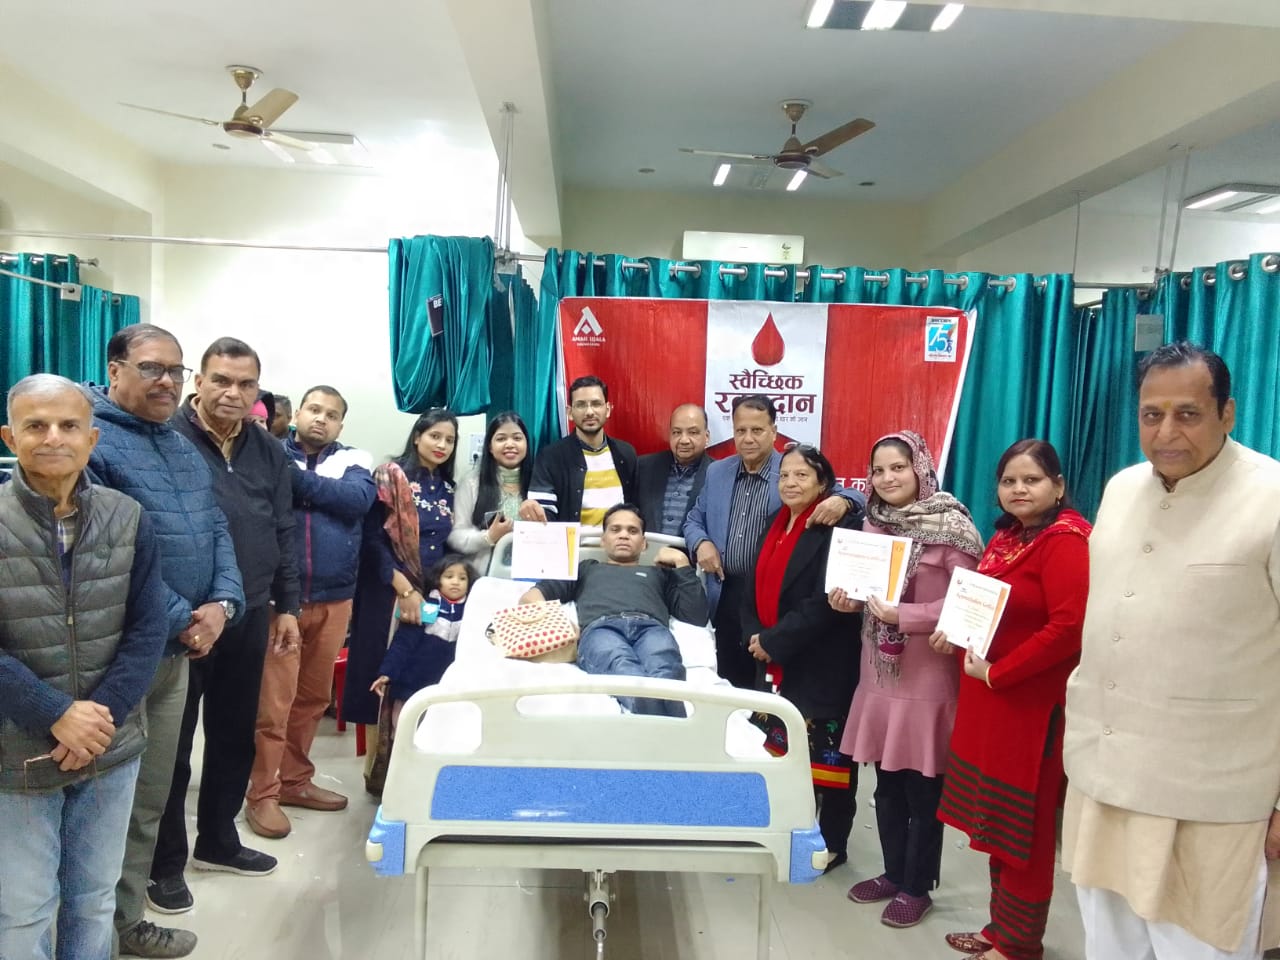 We all should come together and donate blood for humanity: Dr. Naman Singhal